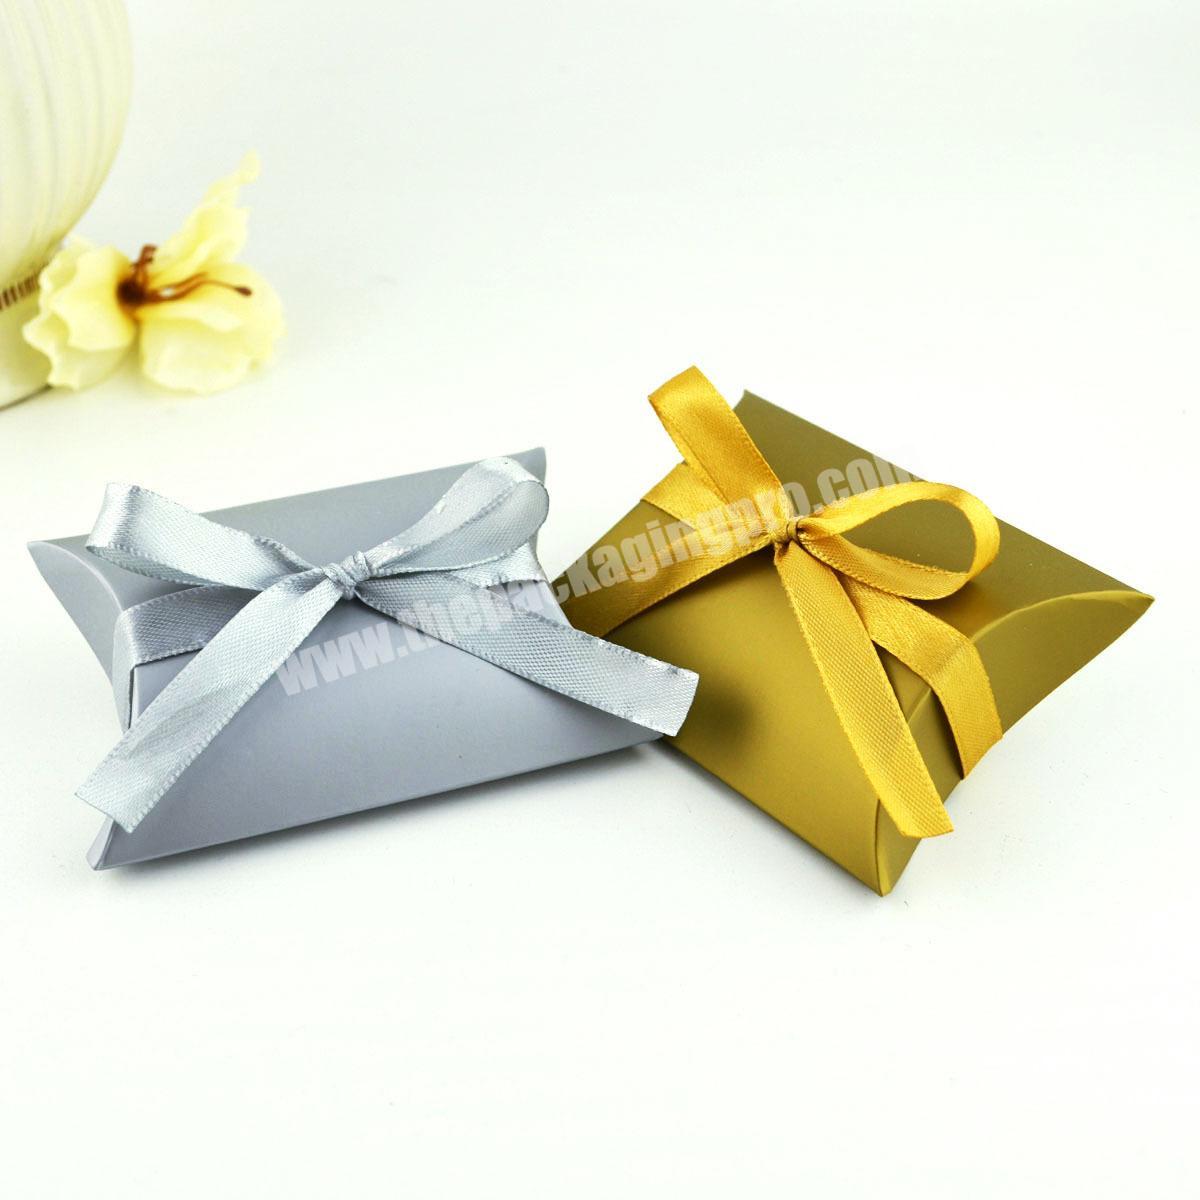 Fashionable pillow box exquisite box for packing small gifts